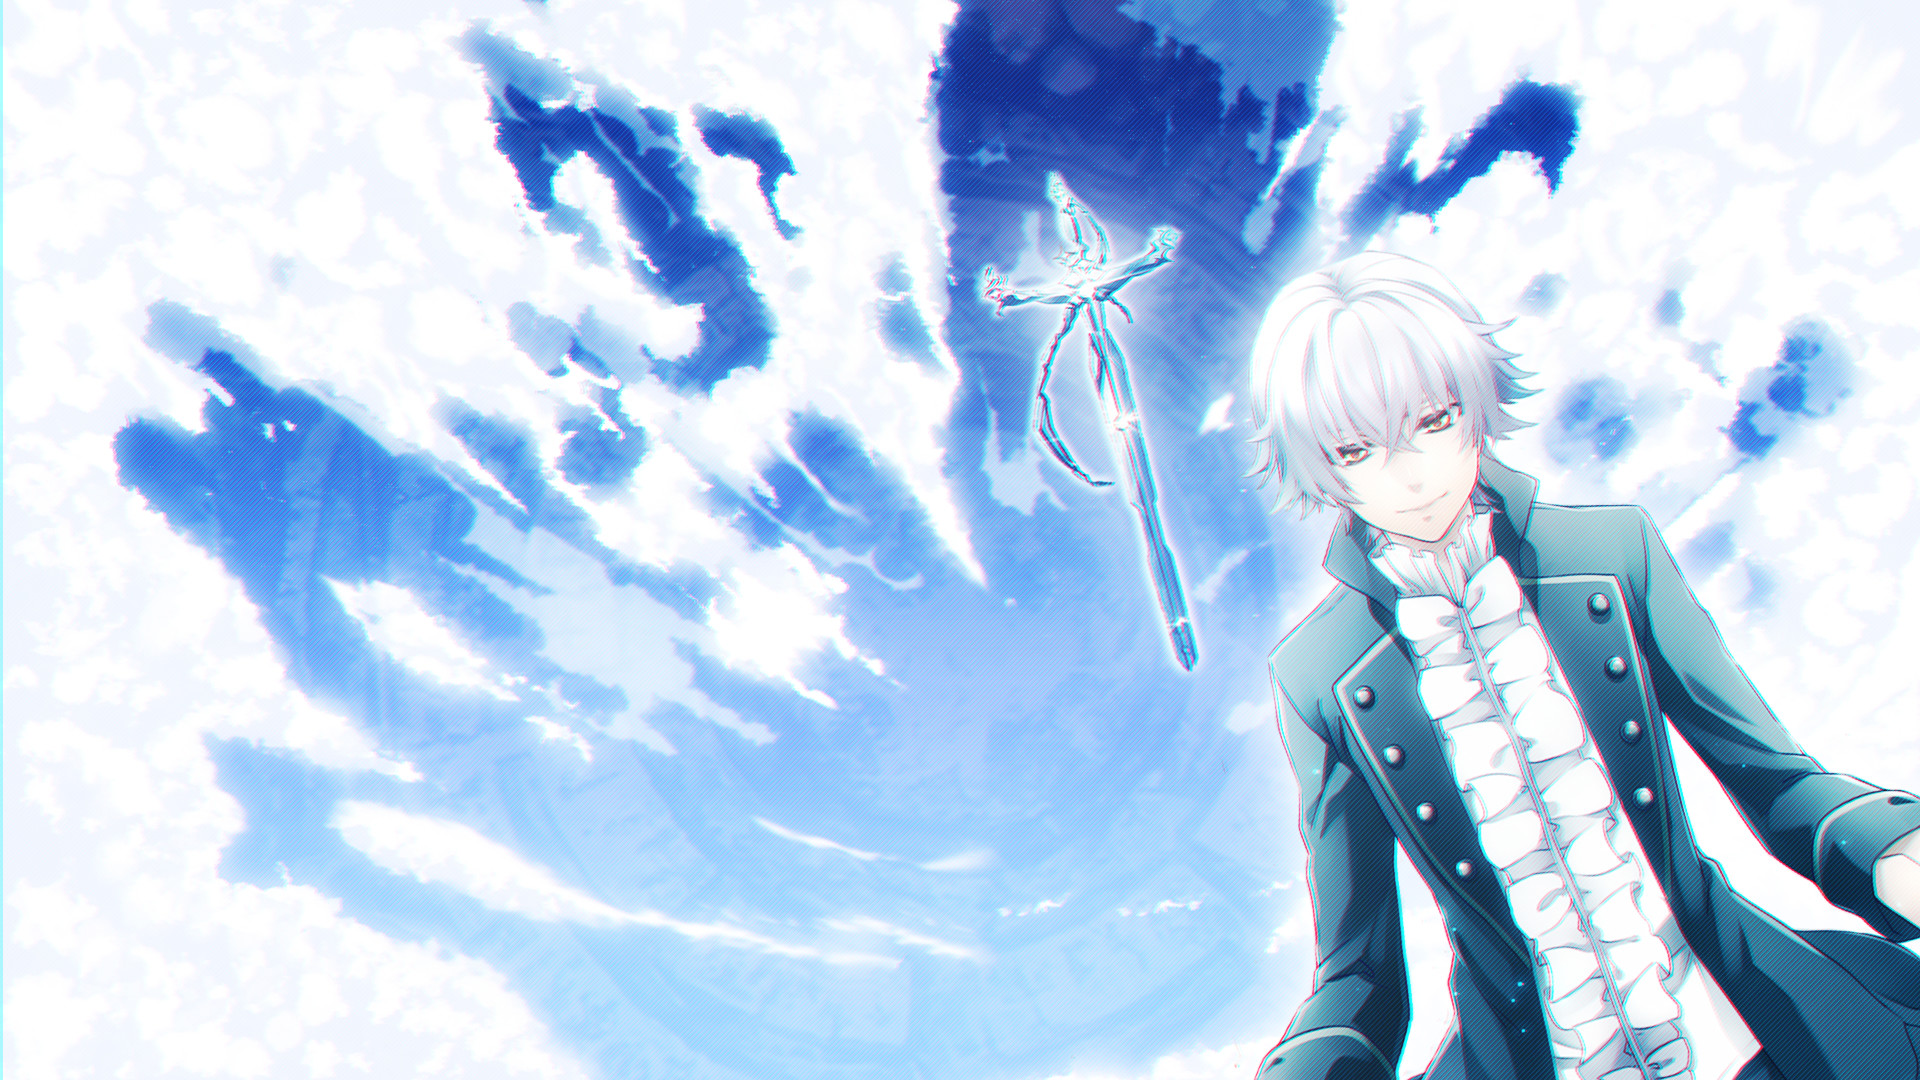 1920x1080 ... K Project - The Silver King by MoonScarf7